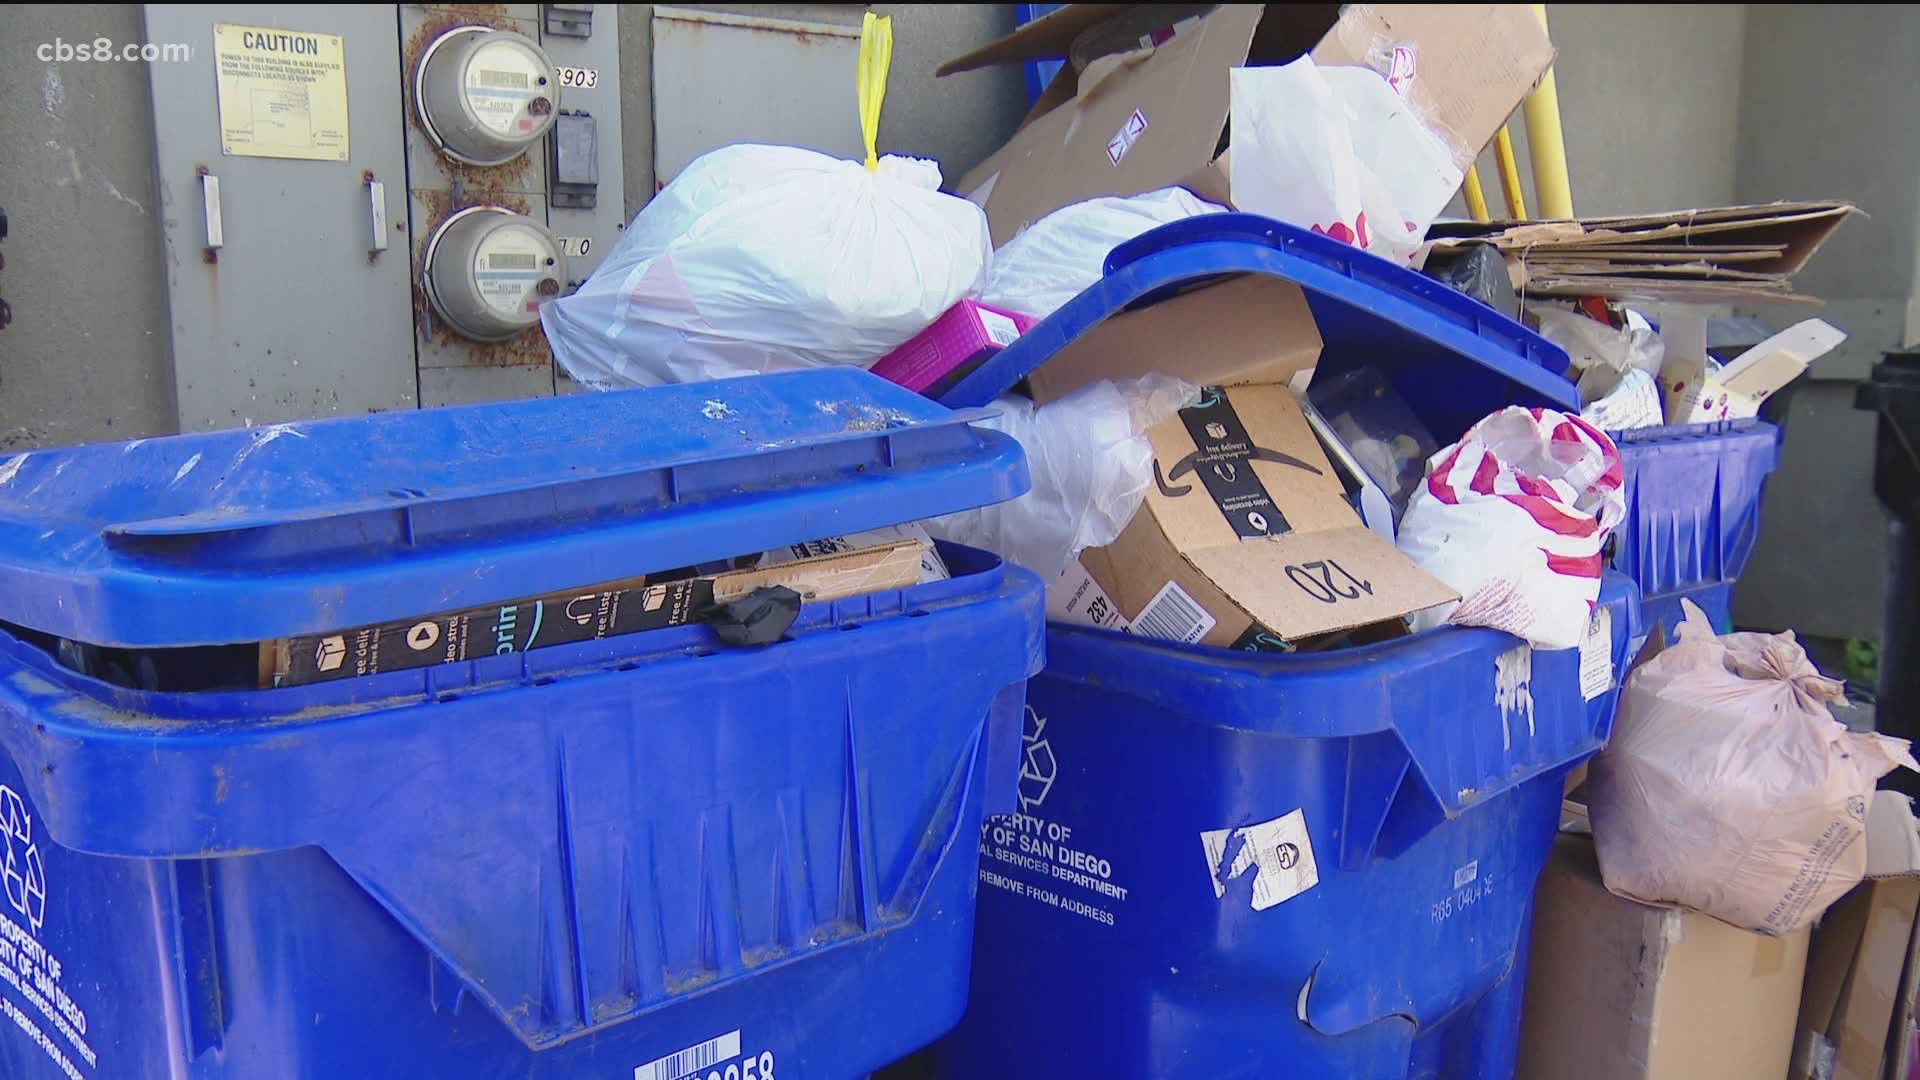 Neighbors in Mission Beach say trash isn't being taken out often enough.